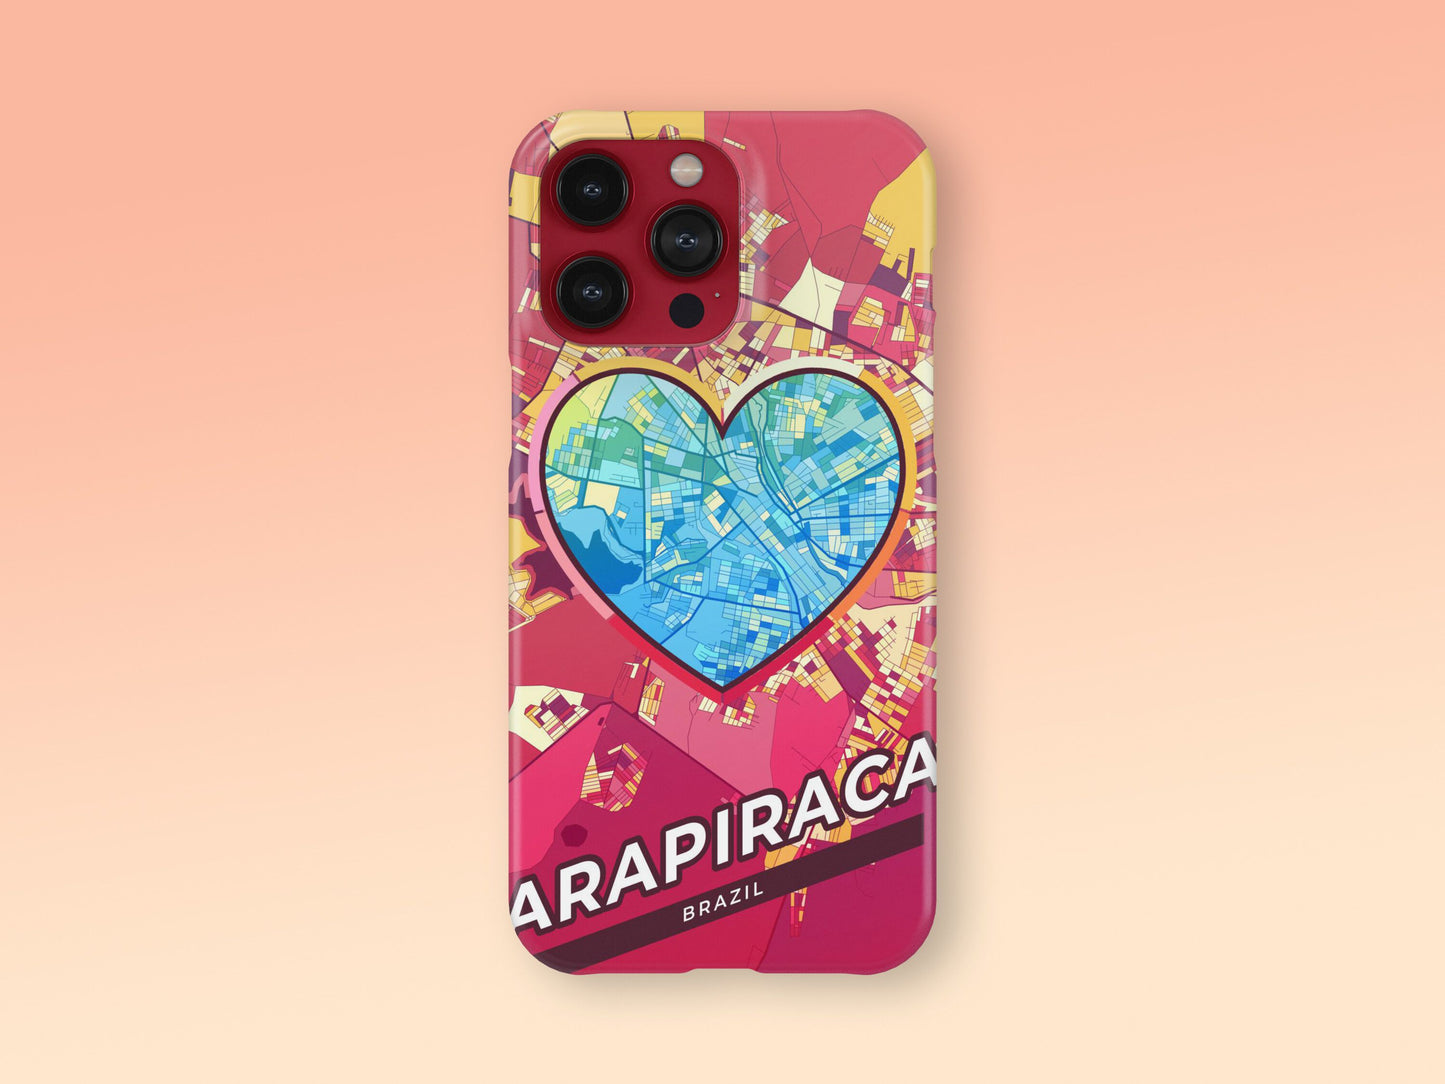 Arapiraca Brazil slim phone case with colorful icon. Birthday, wedding or housewarming gift. Couple match cases. 2